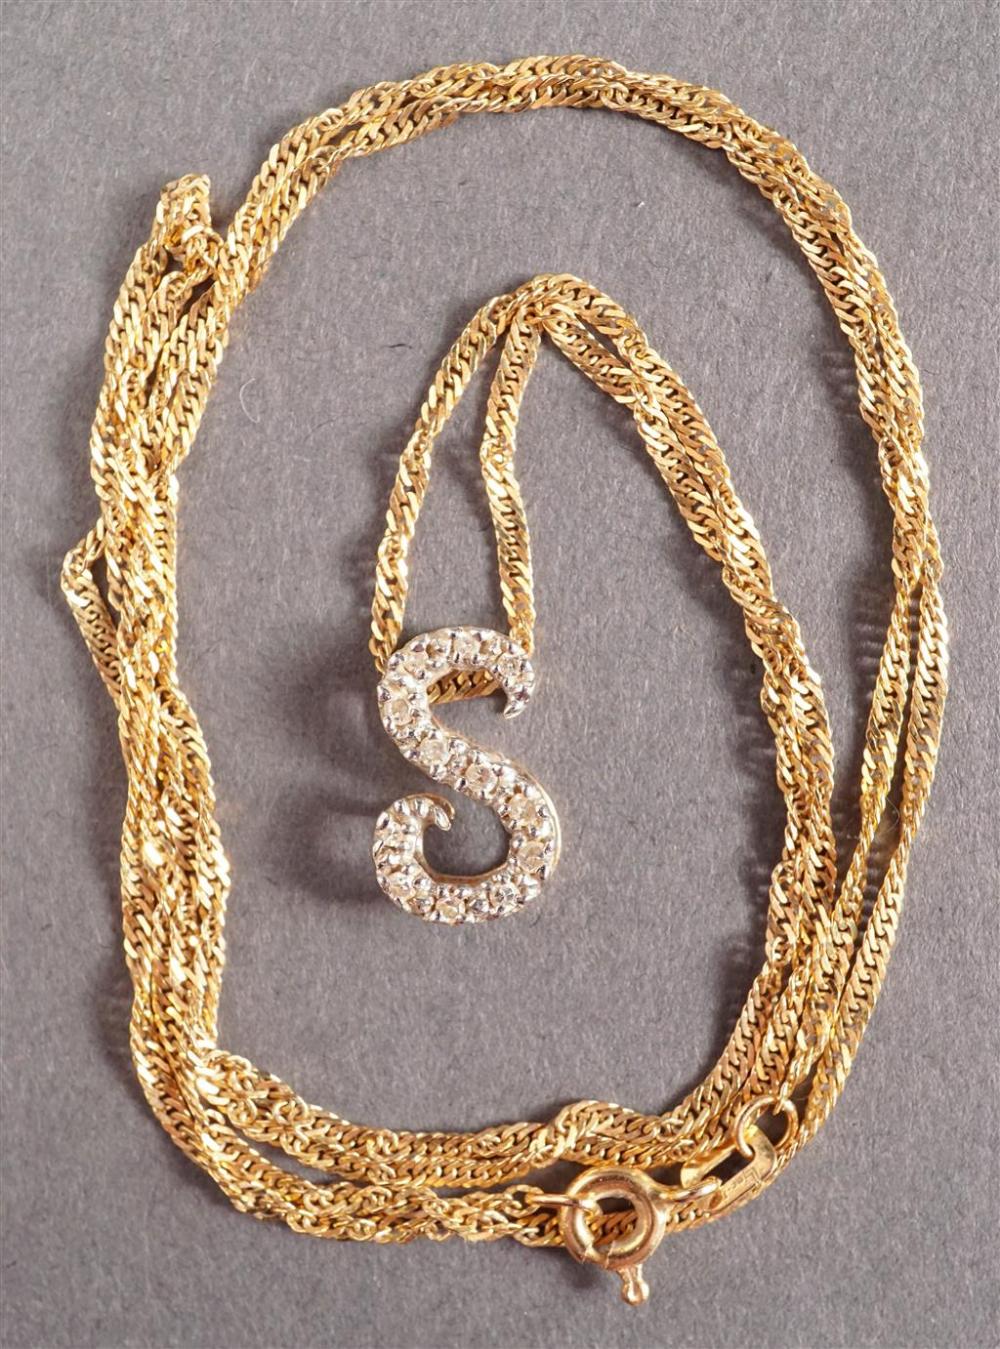 14 KARAT YELLOW GOLD NECKLACE WITH 328fca